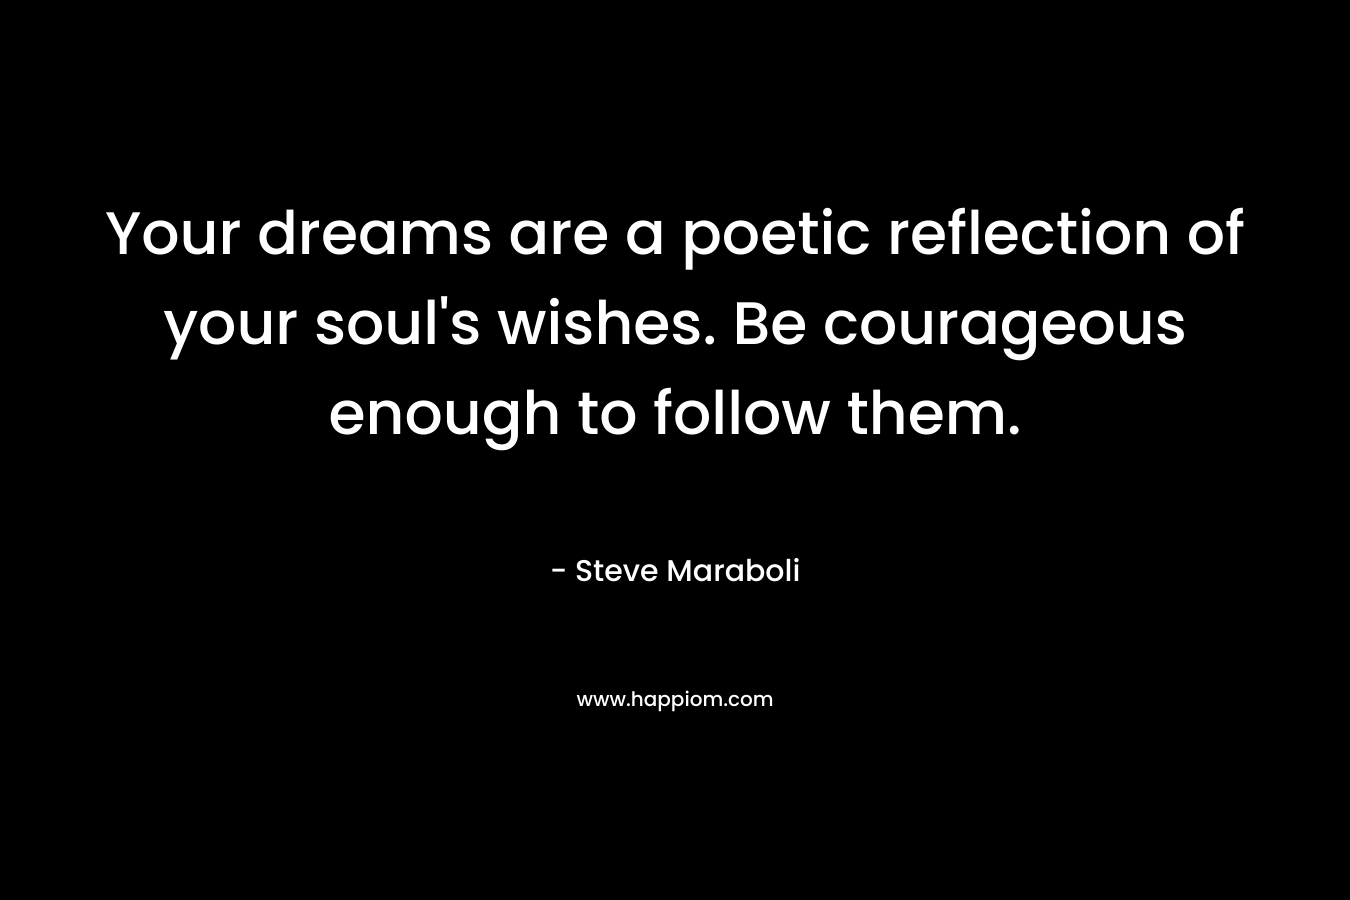 Your dreams are a poetic reflection of your soul's wishes. Be courageous enough to follow them.